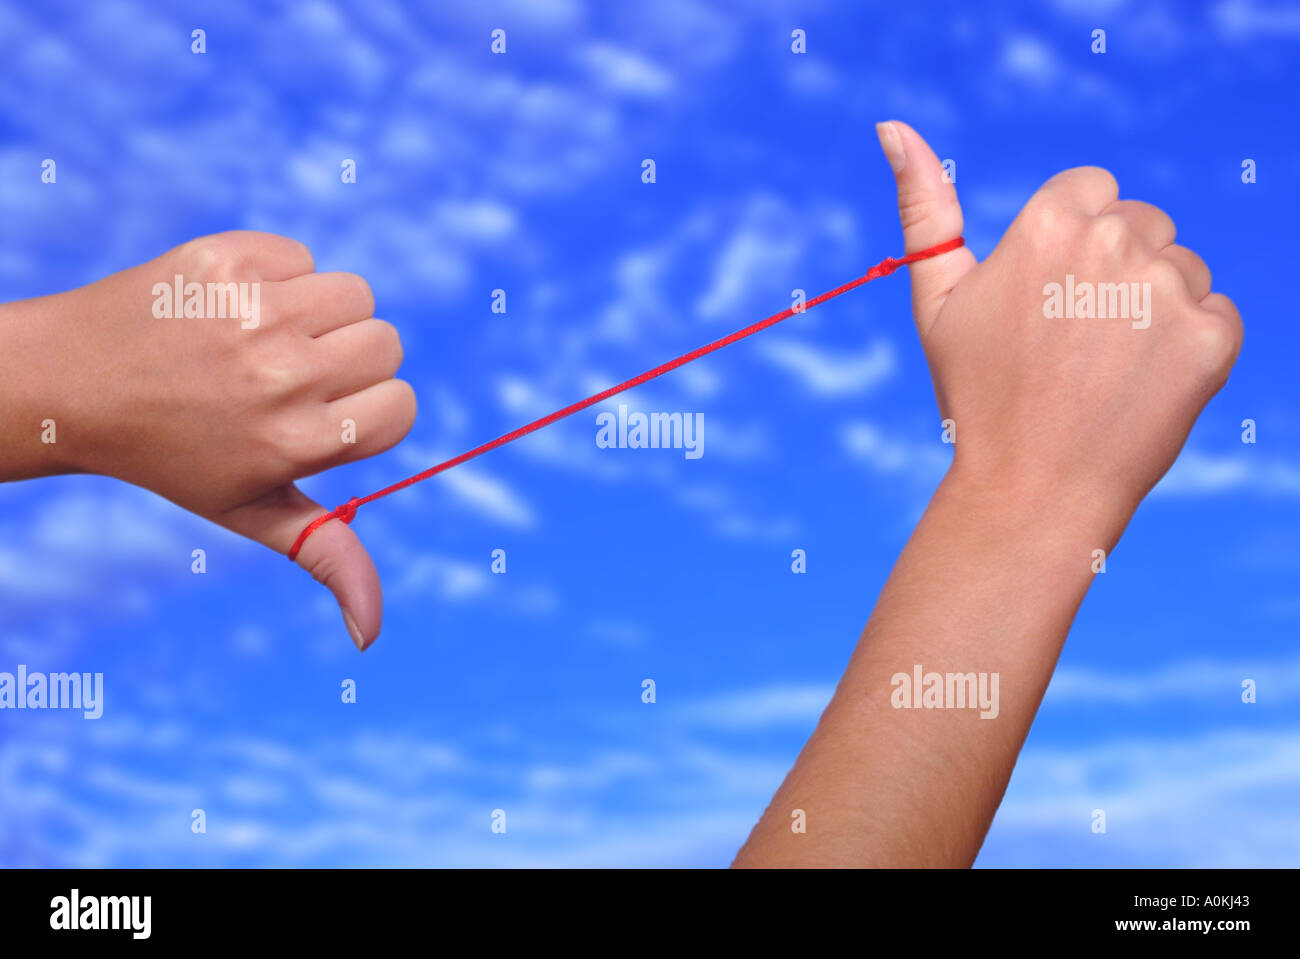 Two thumbs connected via string Stock Photo